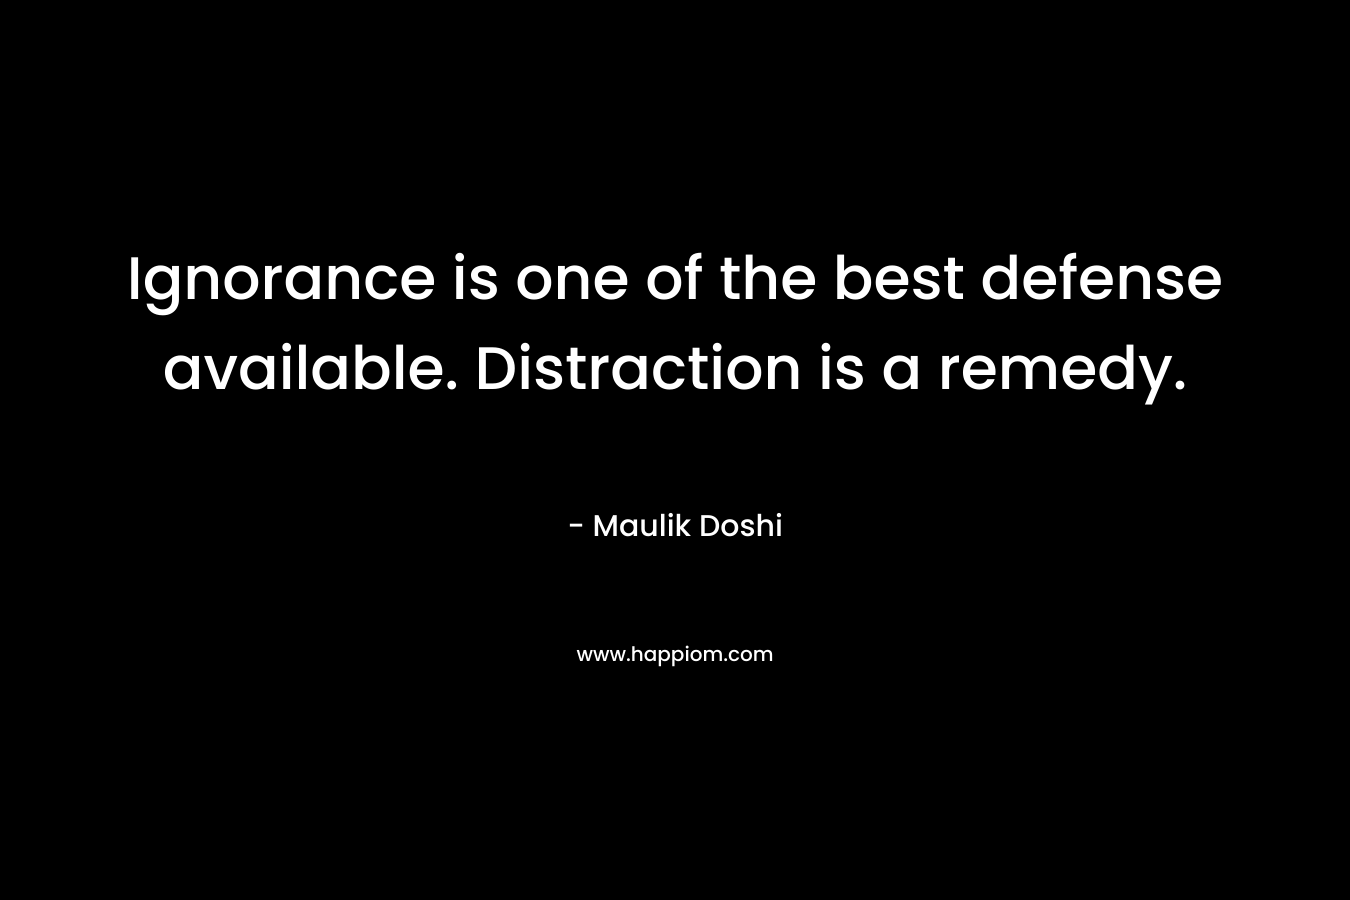 Ignorance is one of the best defense available. Distraction is a remedy. – Maulik Doshi